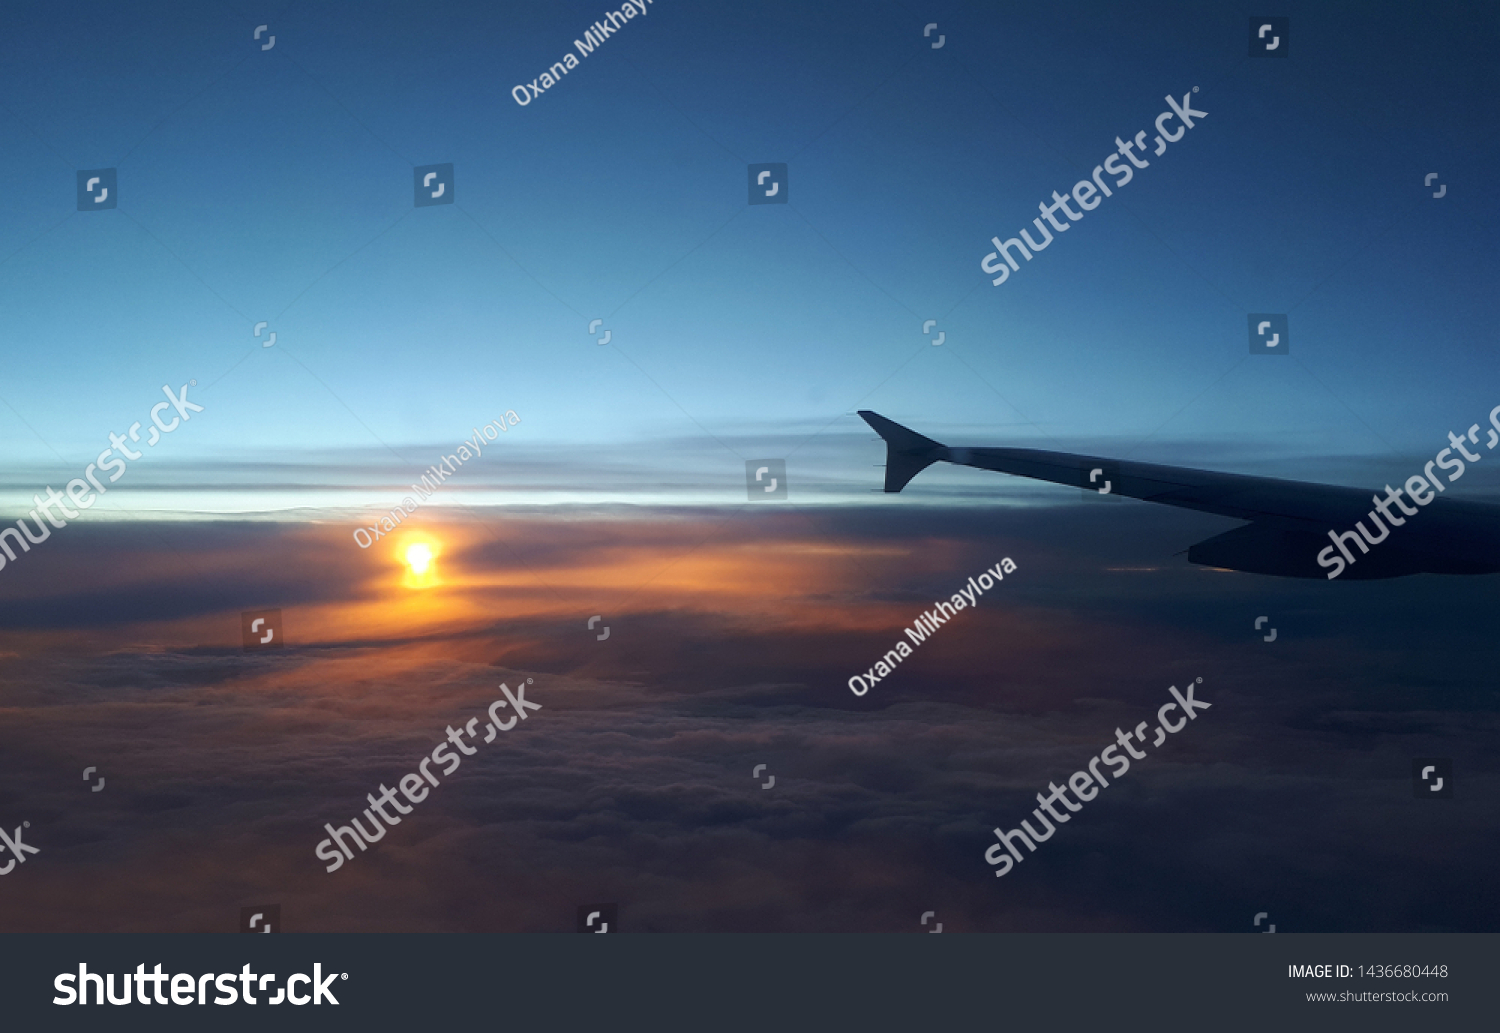 View from airplane. Colorful sunset/sunrise in the sky. #1436680448